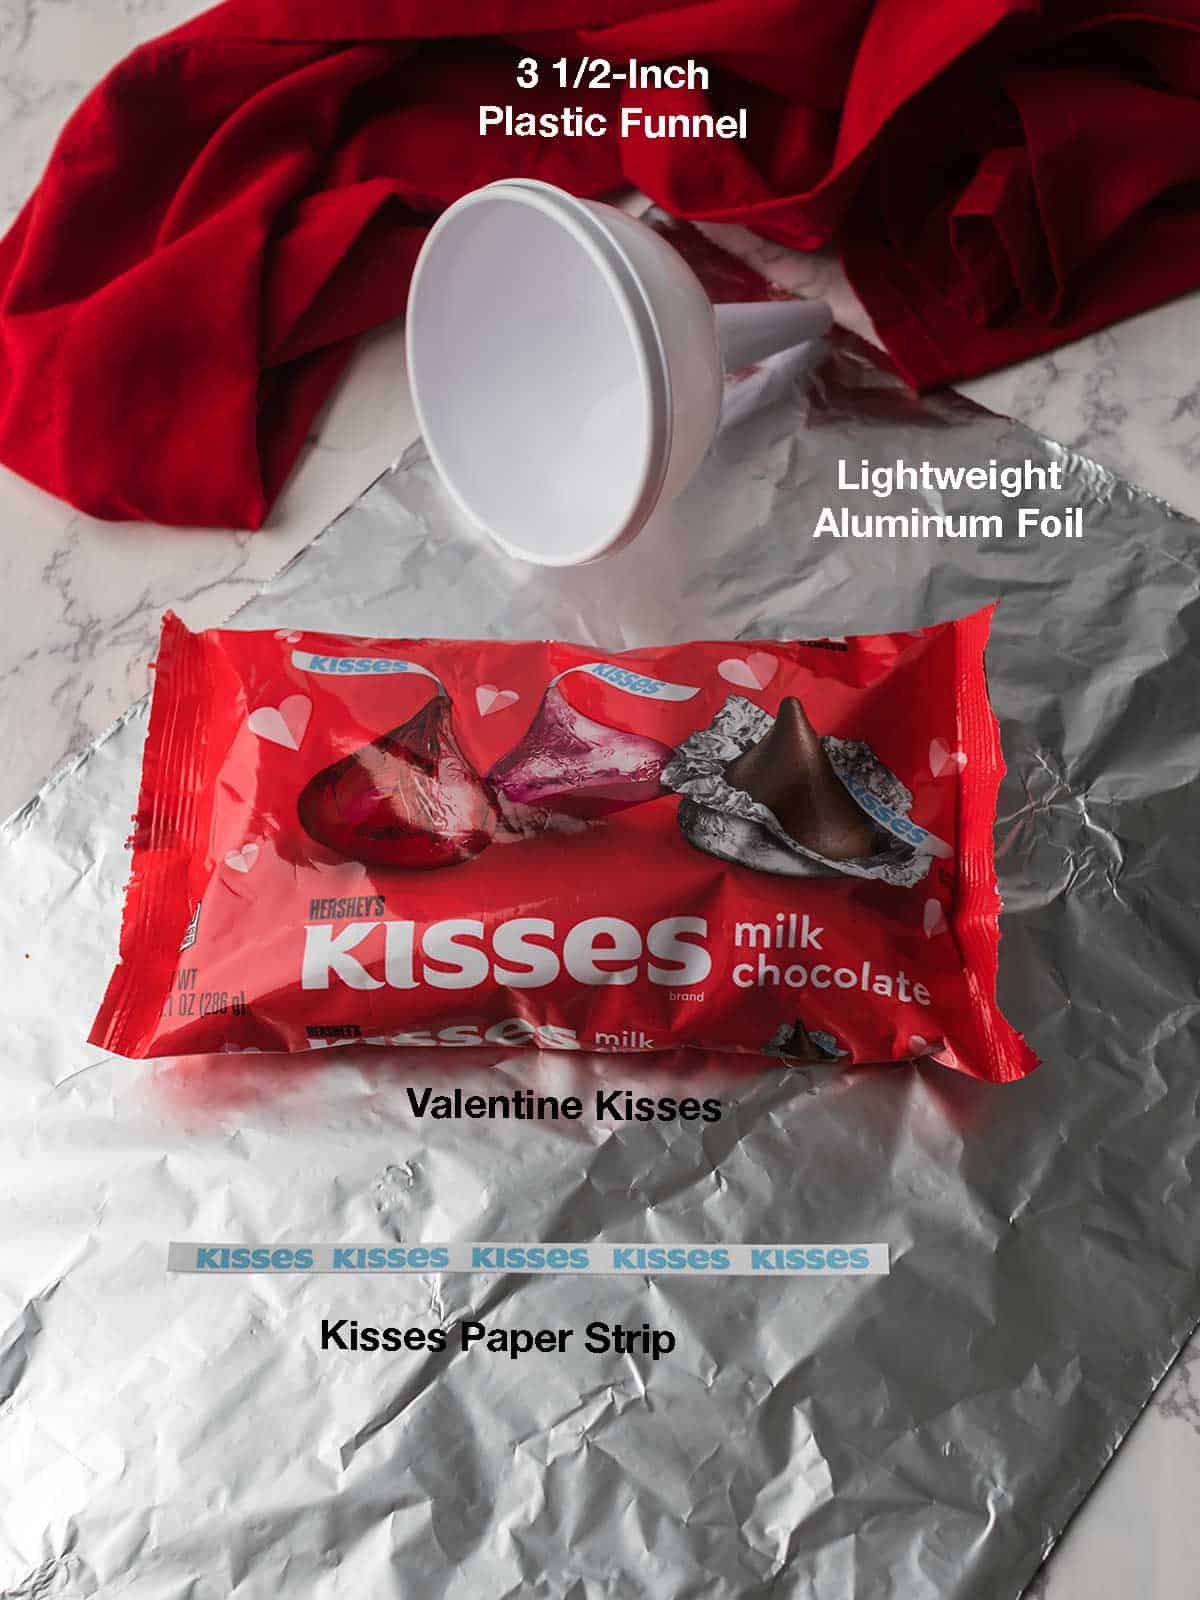 Ingredients for Giant-Filled Valentine Kiss.